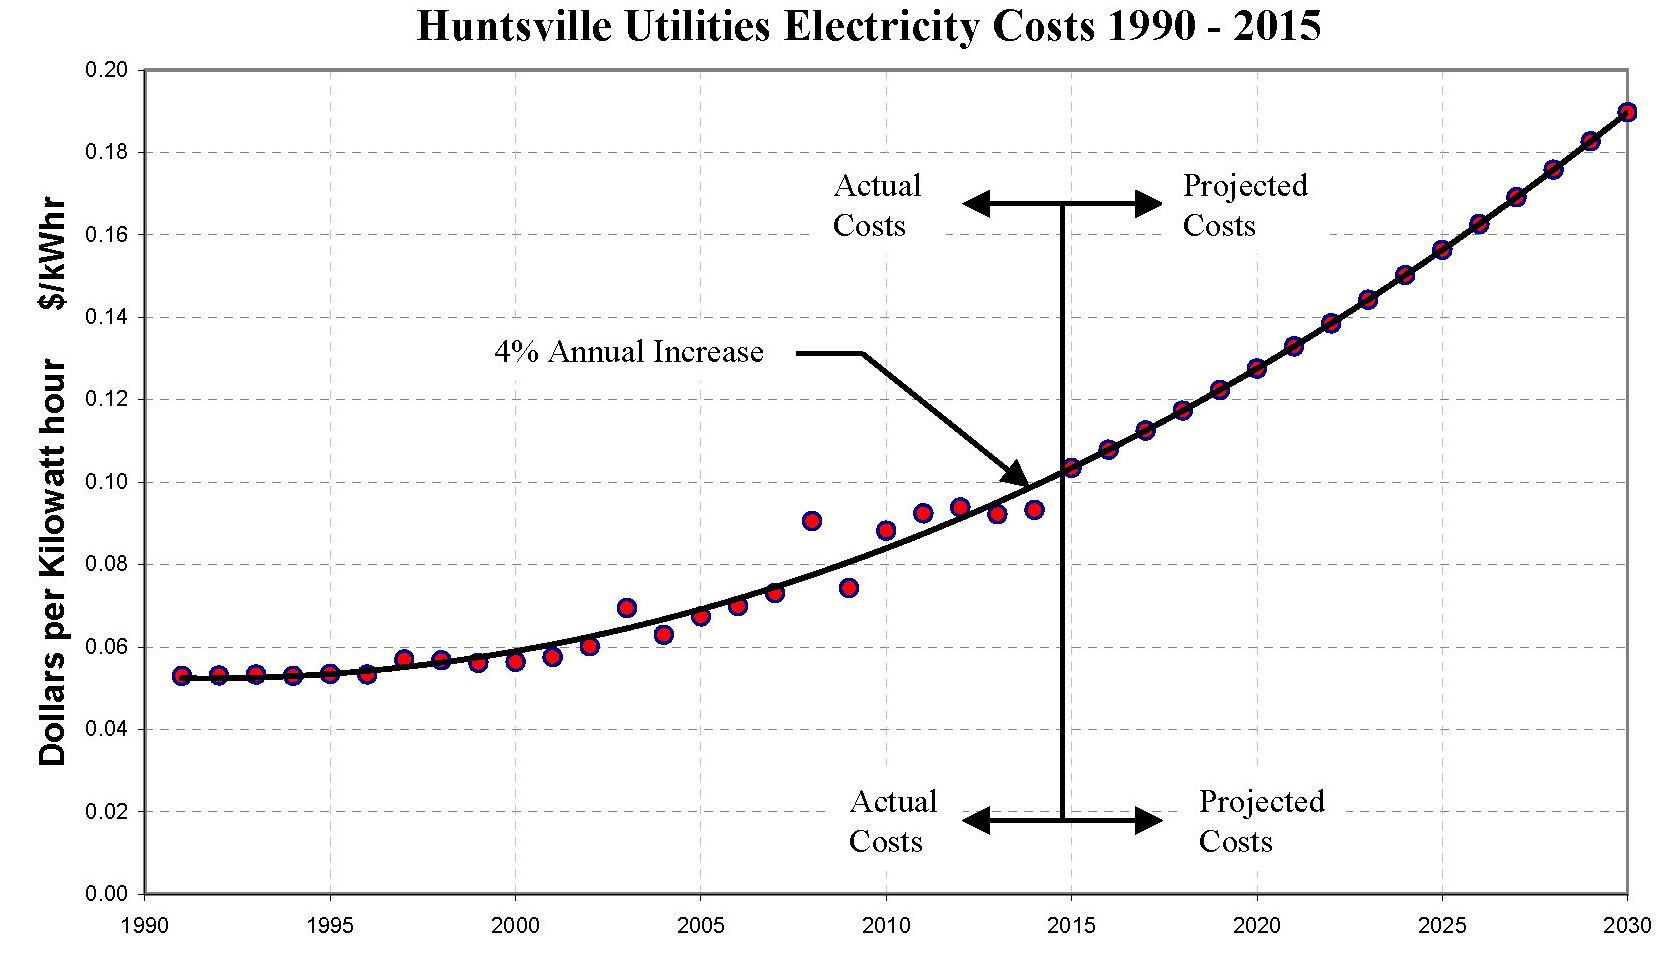 Annual Increase in Electricity Rates